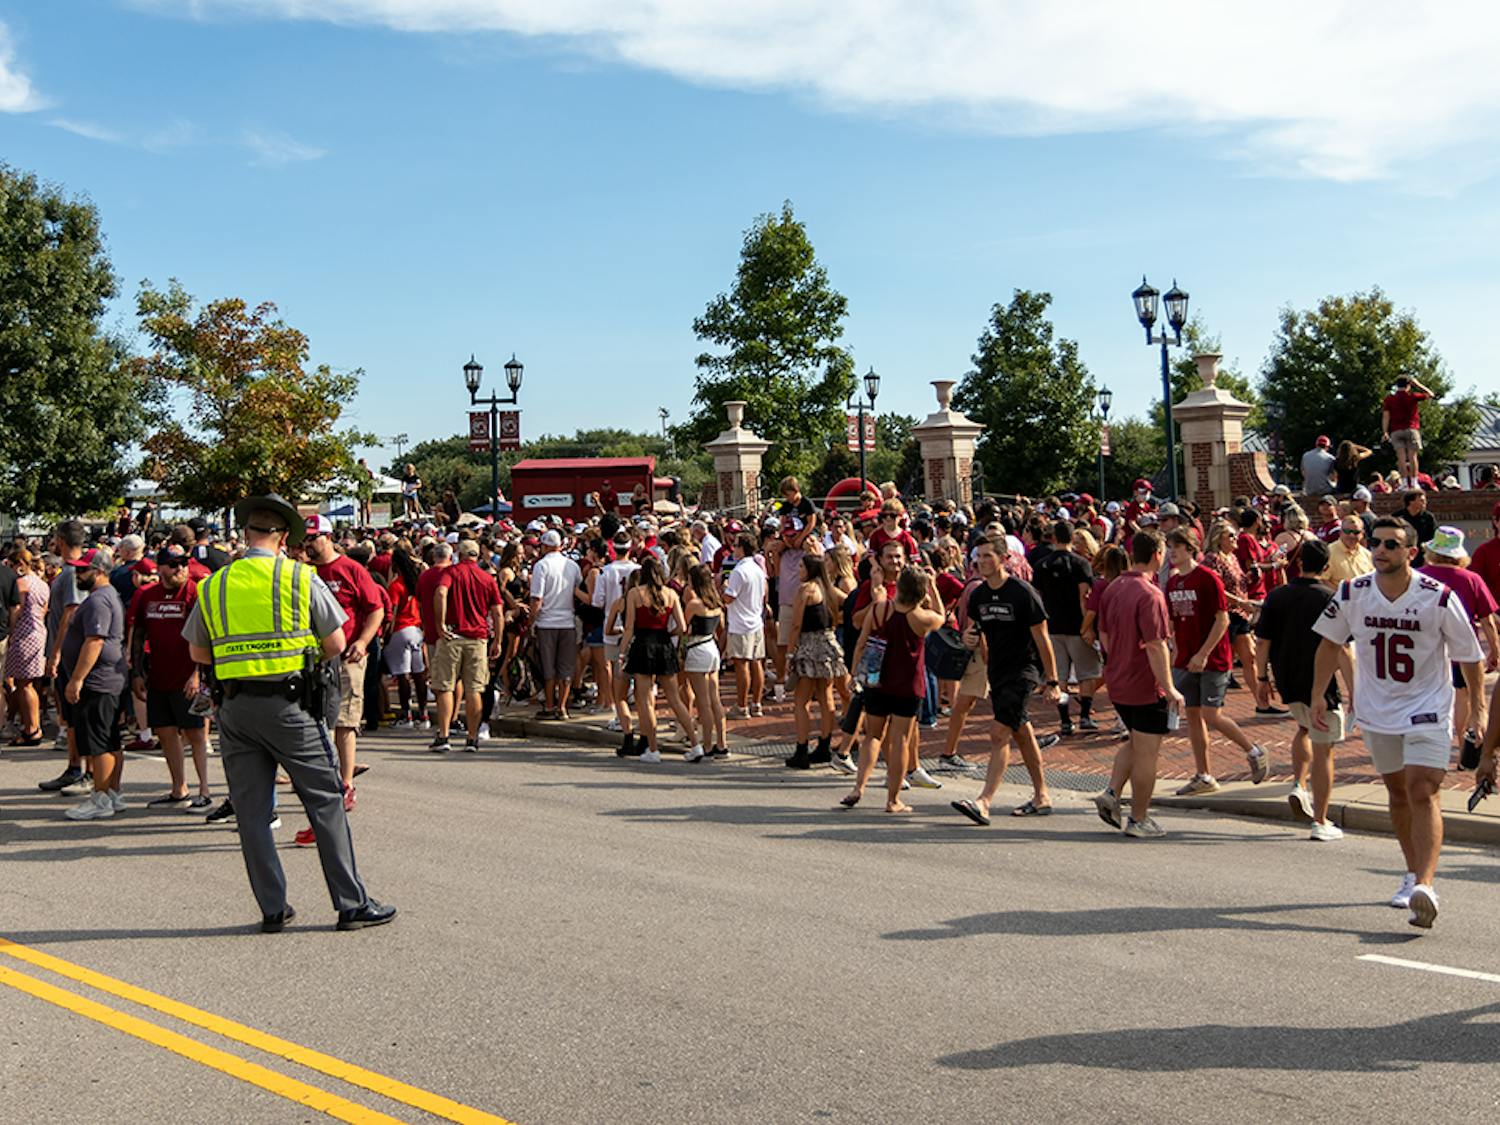 Gamecock fans stop traffic on Bluff Road between Williams-Brice Stadium and Gamecock Park for Gamecock Walk.